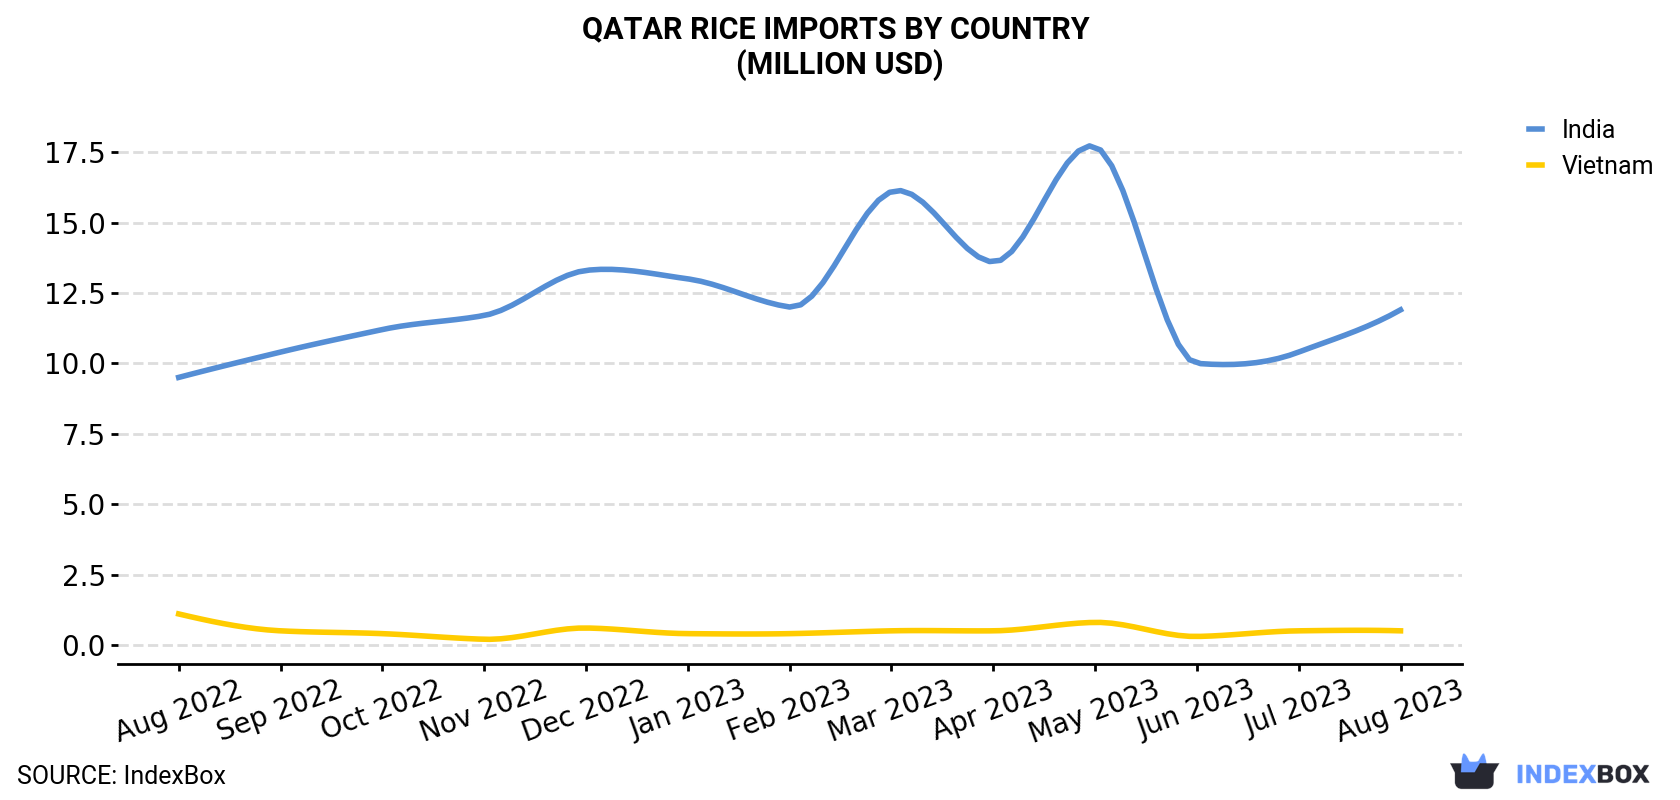 Qatar Rice Imports By Country (Million USD)